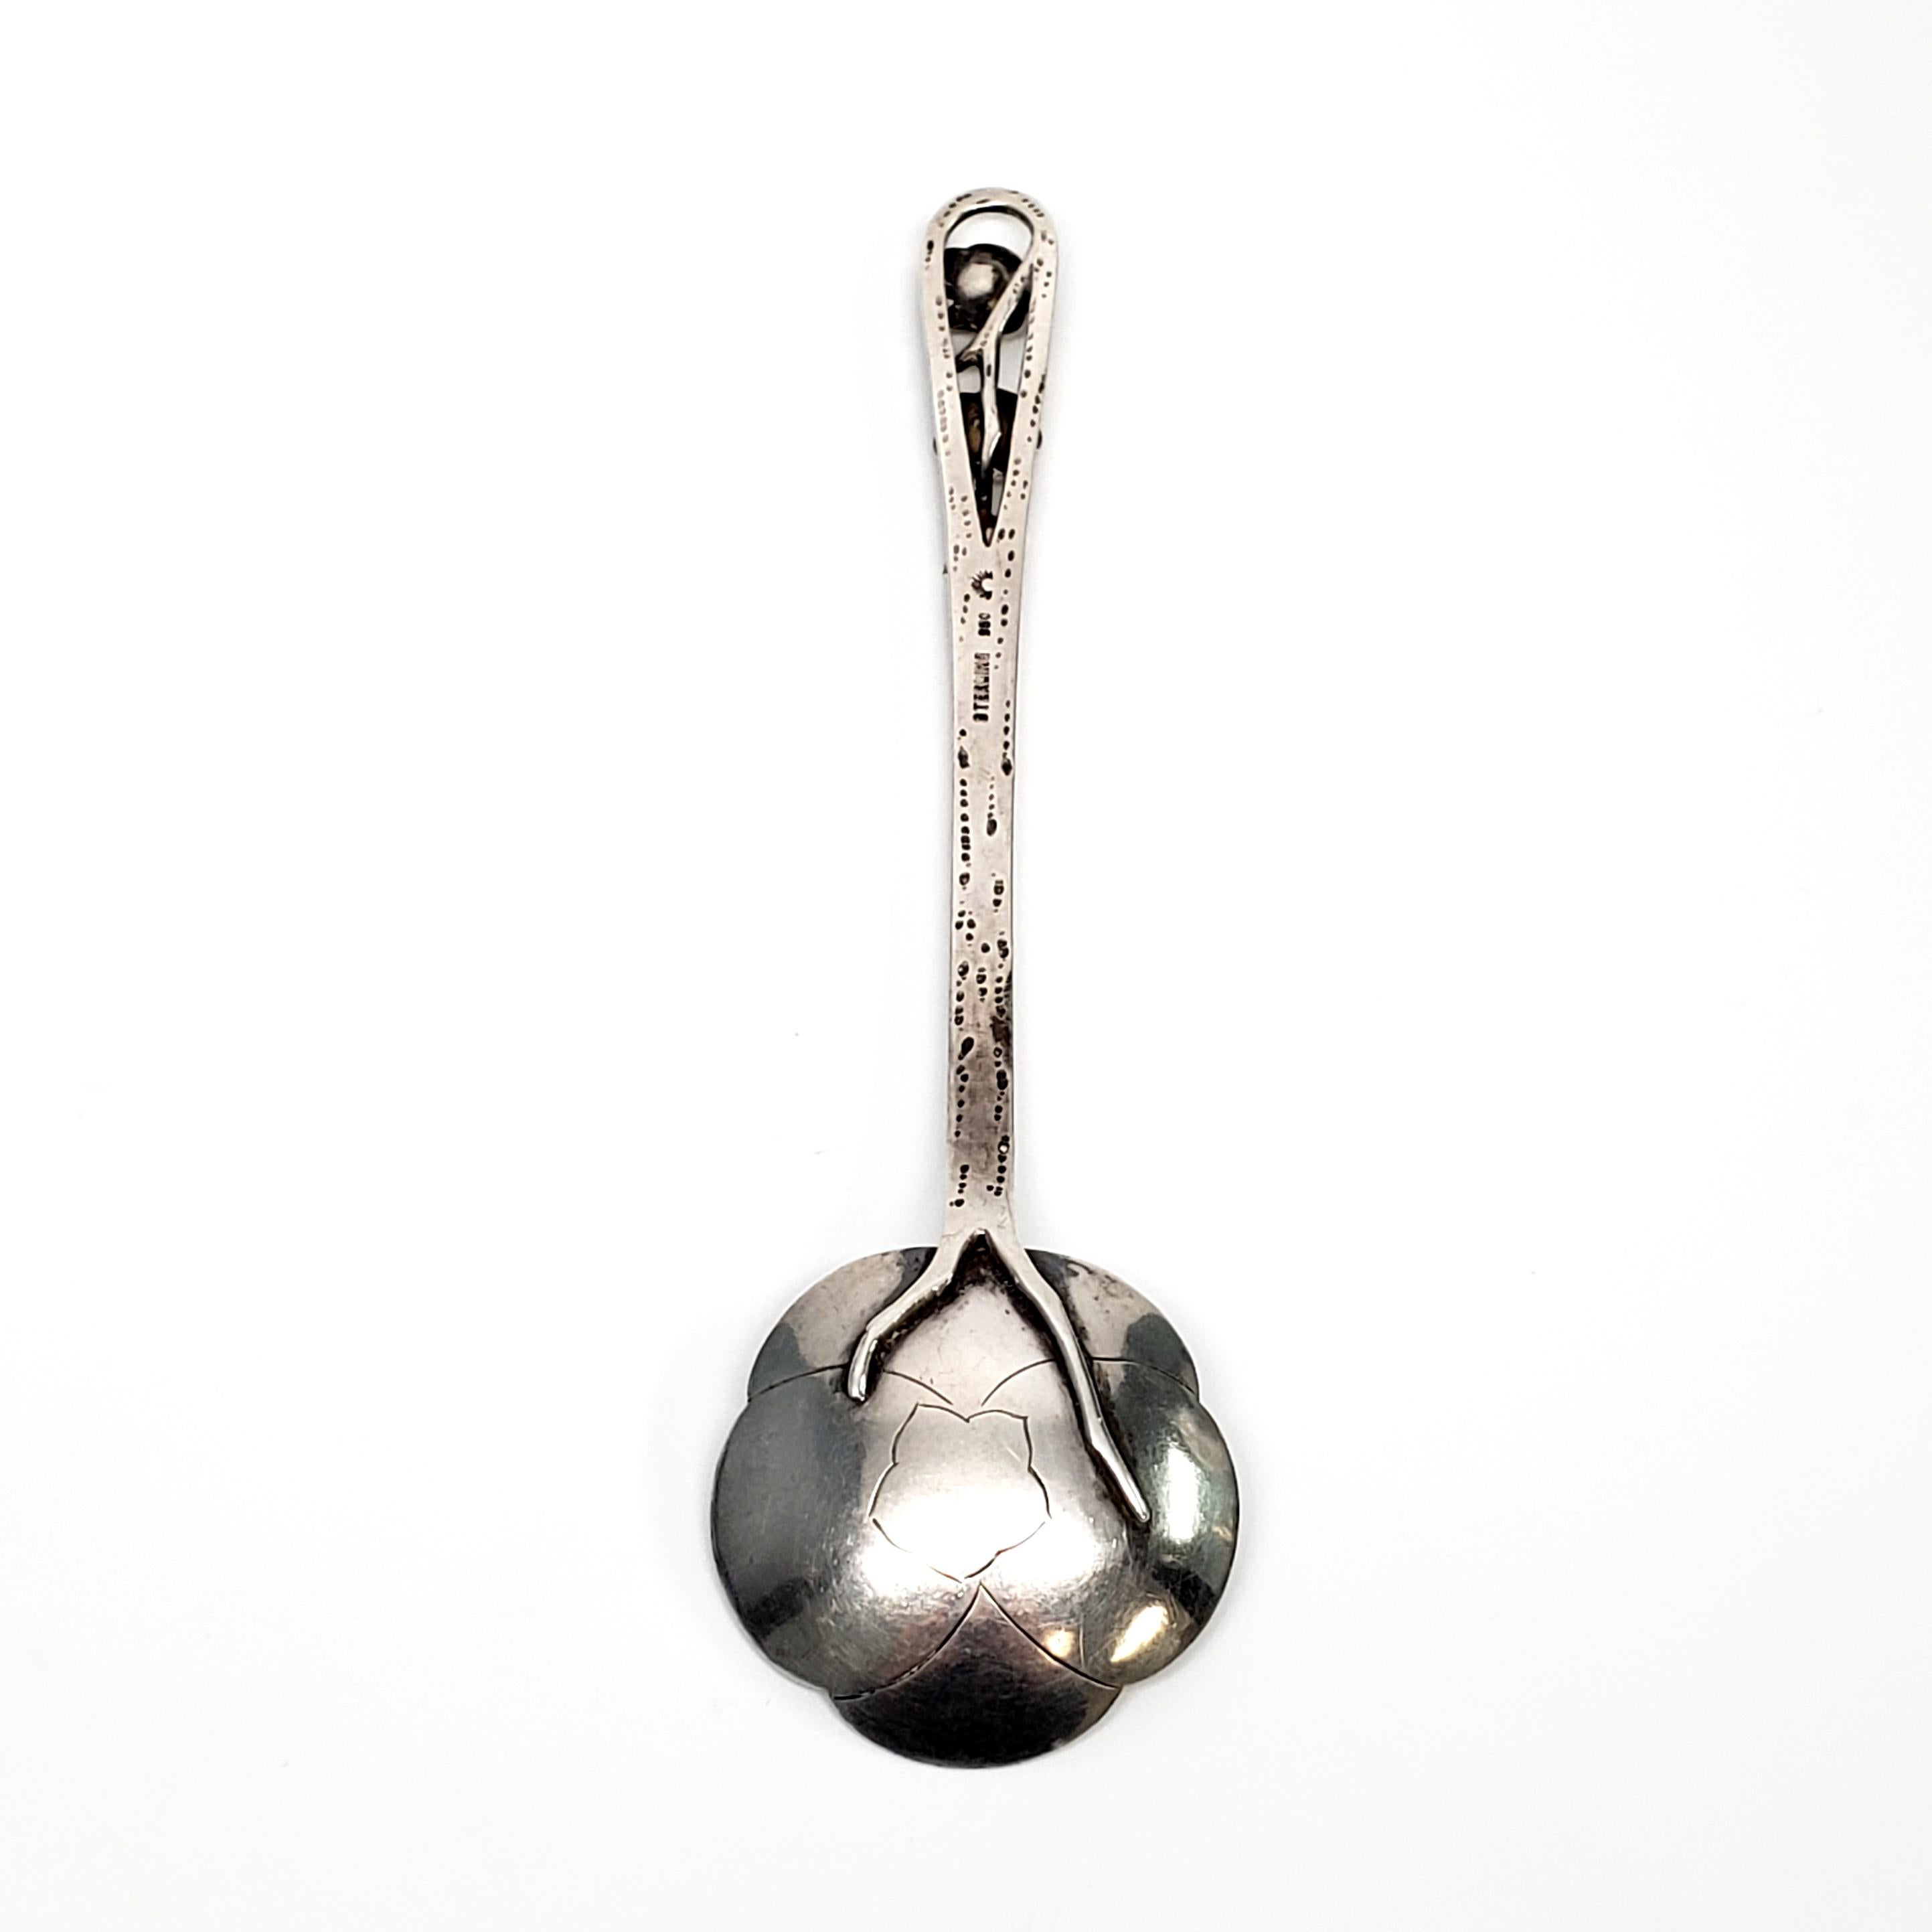 Asahi Shoten Japanese 950 silver lotus flower spoon.

The well known Japanese shop Asahi Shoten opened in the 1890s in Kannai, a district in Yokohama. This beautiful spoon has 2 small lotus flowers on a stem at the top of the handle, and the bowl